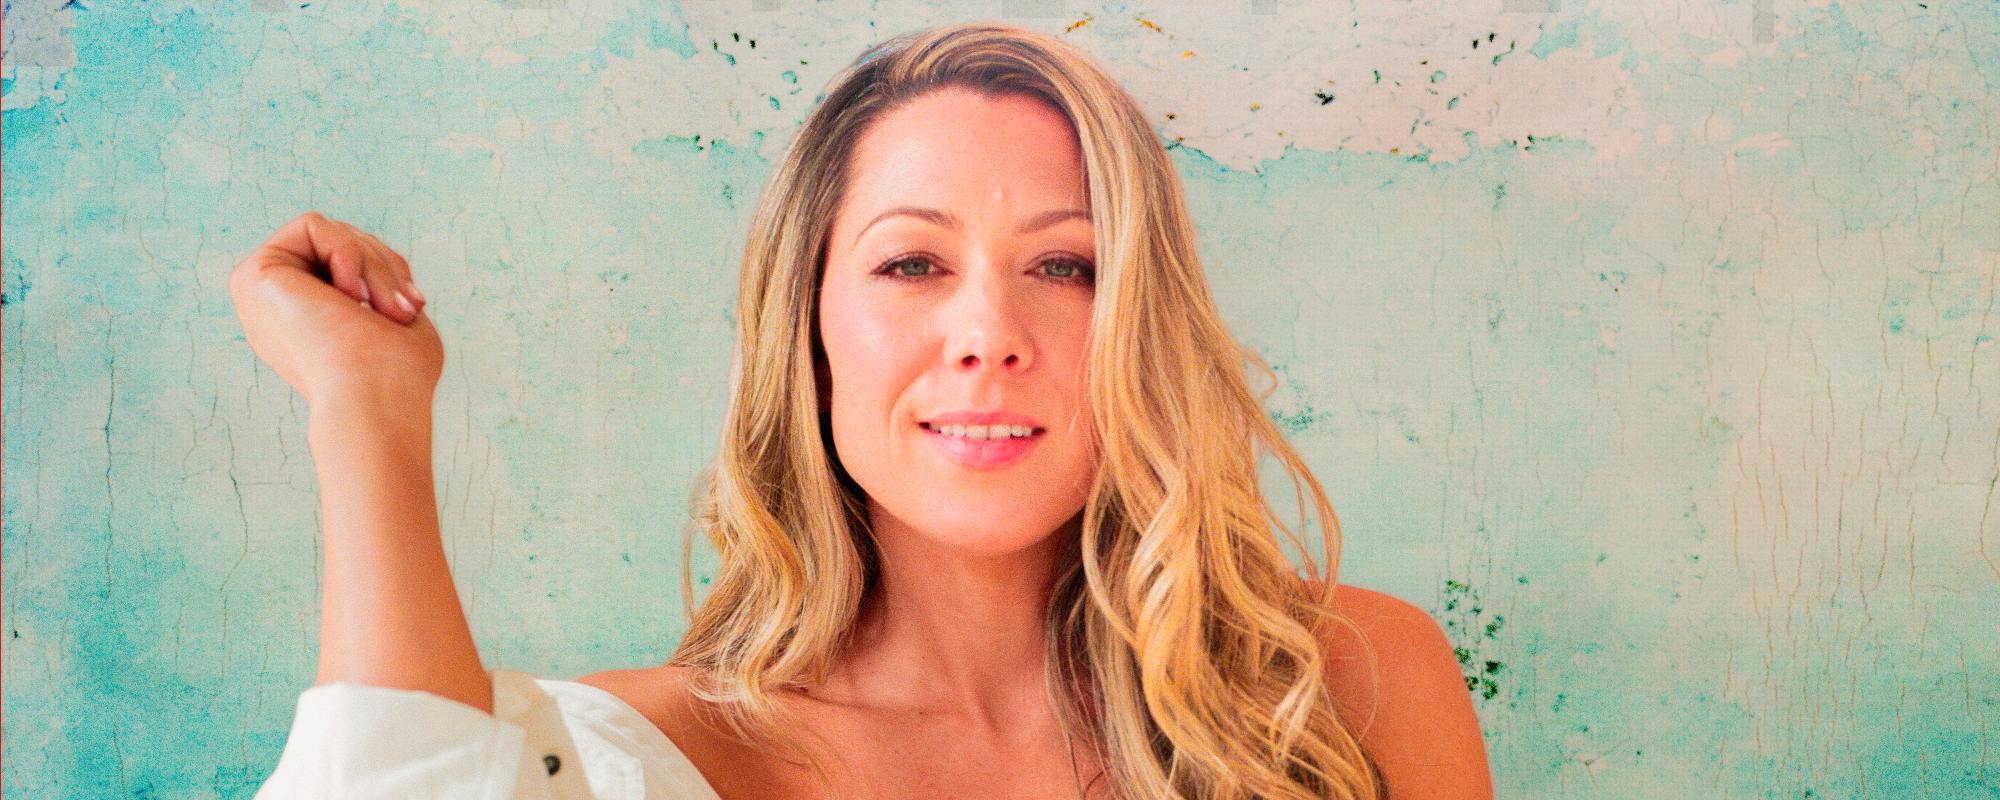 Colbie Caillat’s Breakup Album ‘Along the Way’ Redefines Heartbreak with Positivity—“It Was Something I Needed to Say”